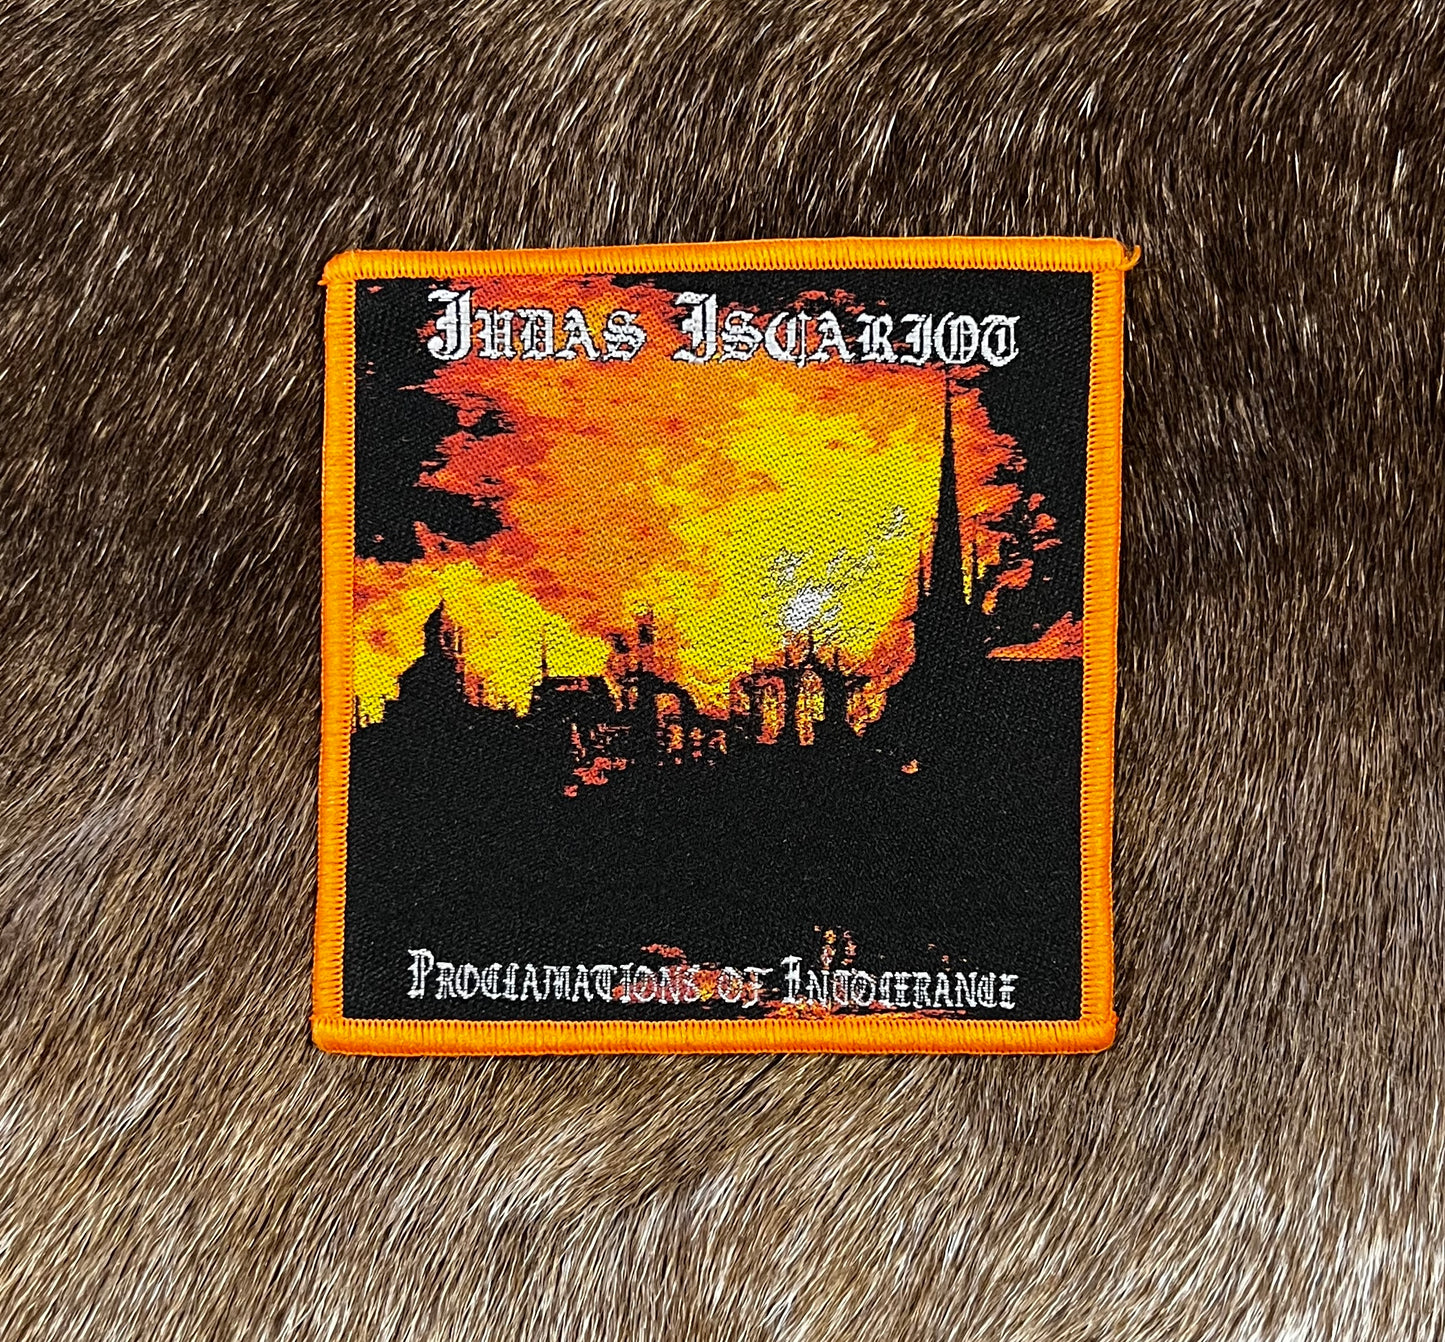 Judas Iscariot - Proclamations Of Intolerance Patch